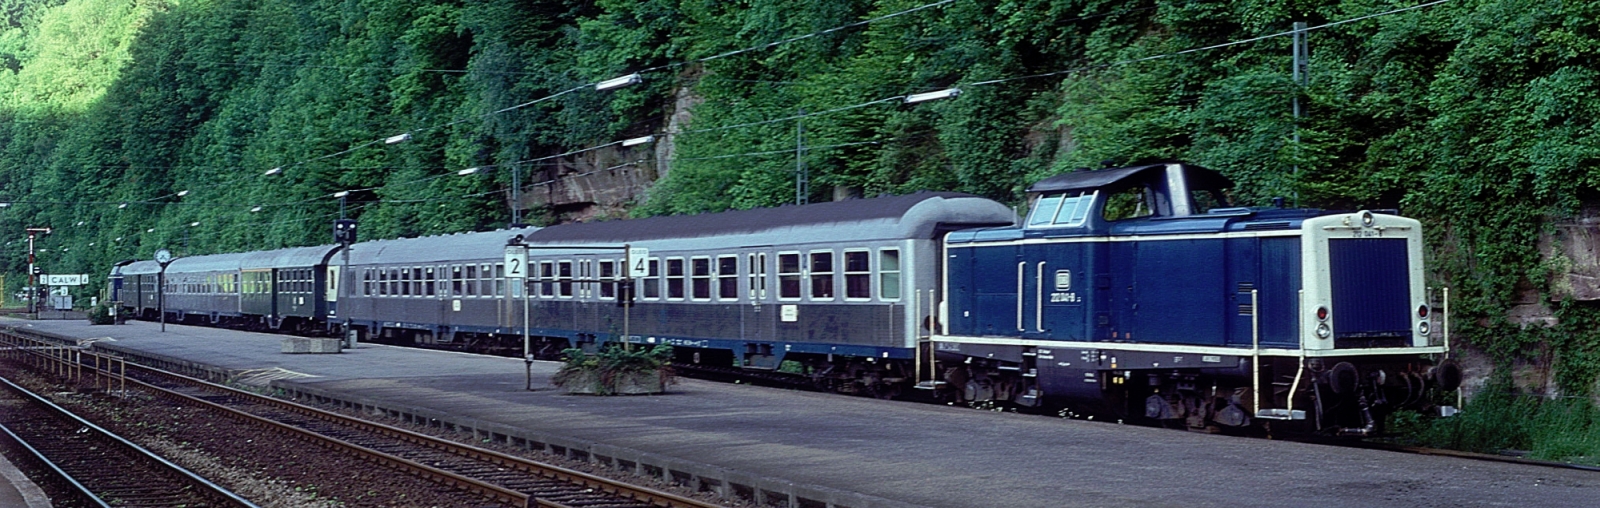 212 041 with a second V 100 at the rear in June 1985 in Calw